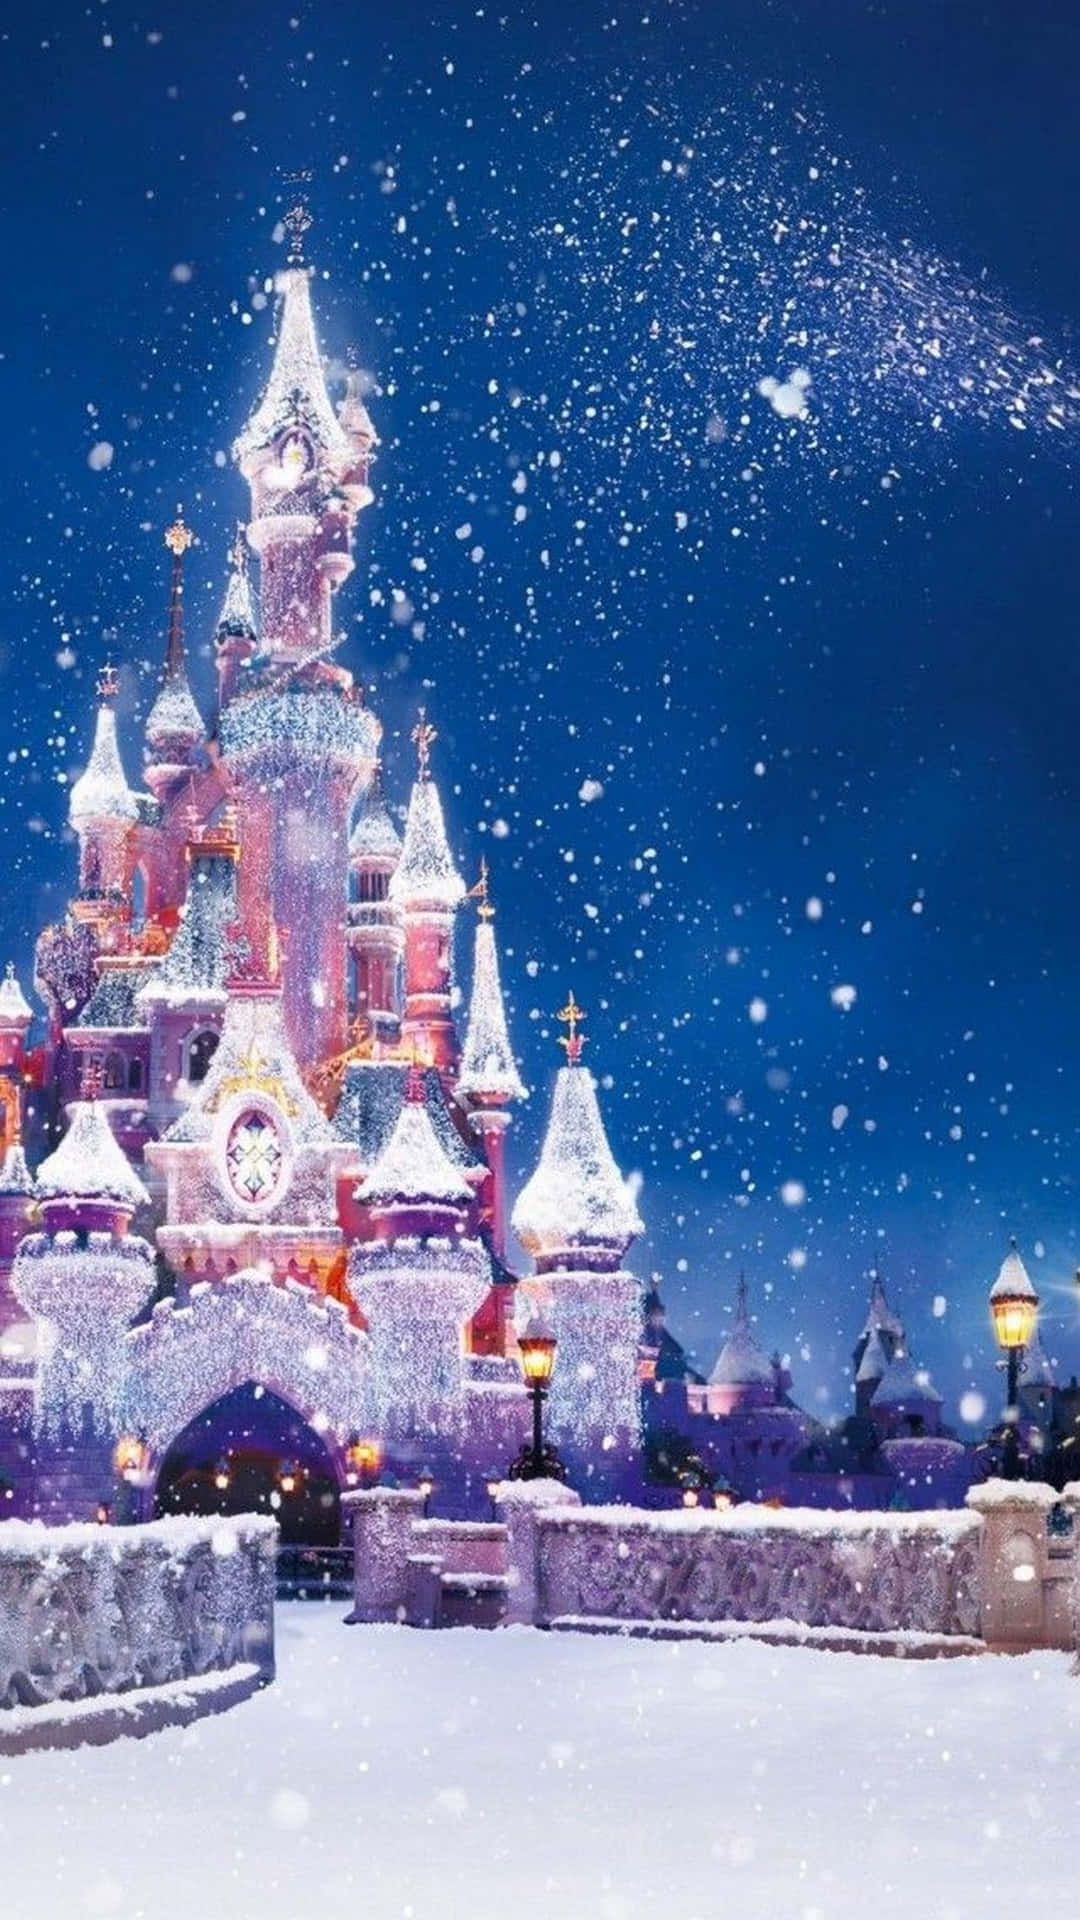 A Castle Is Covered In Snow And Snowflakes Wallpaper